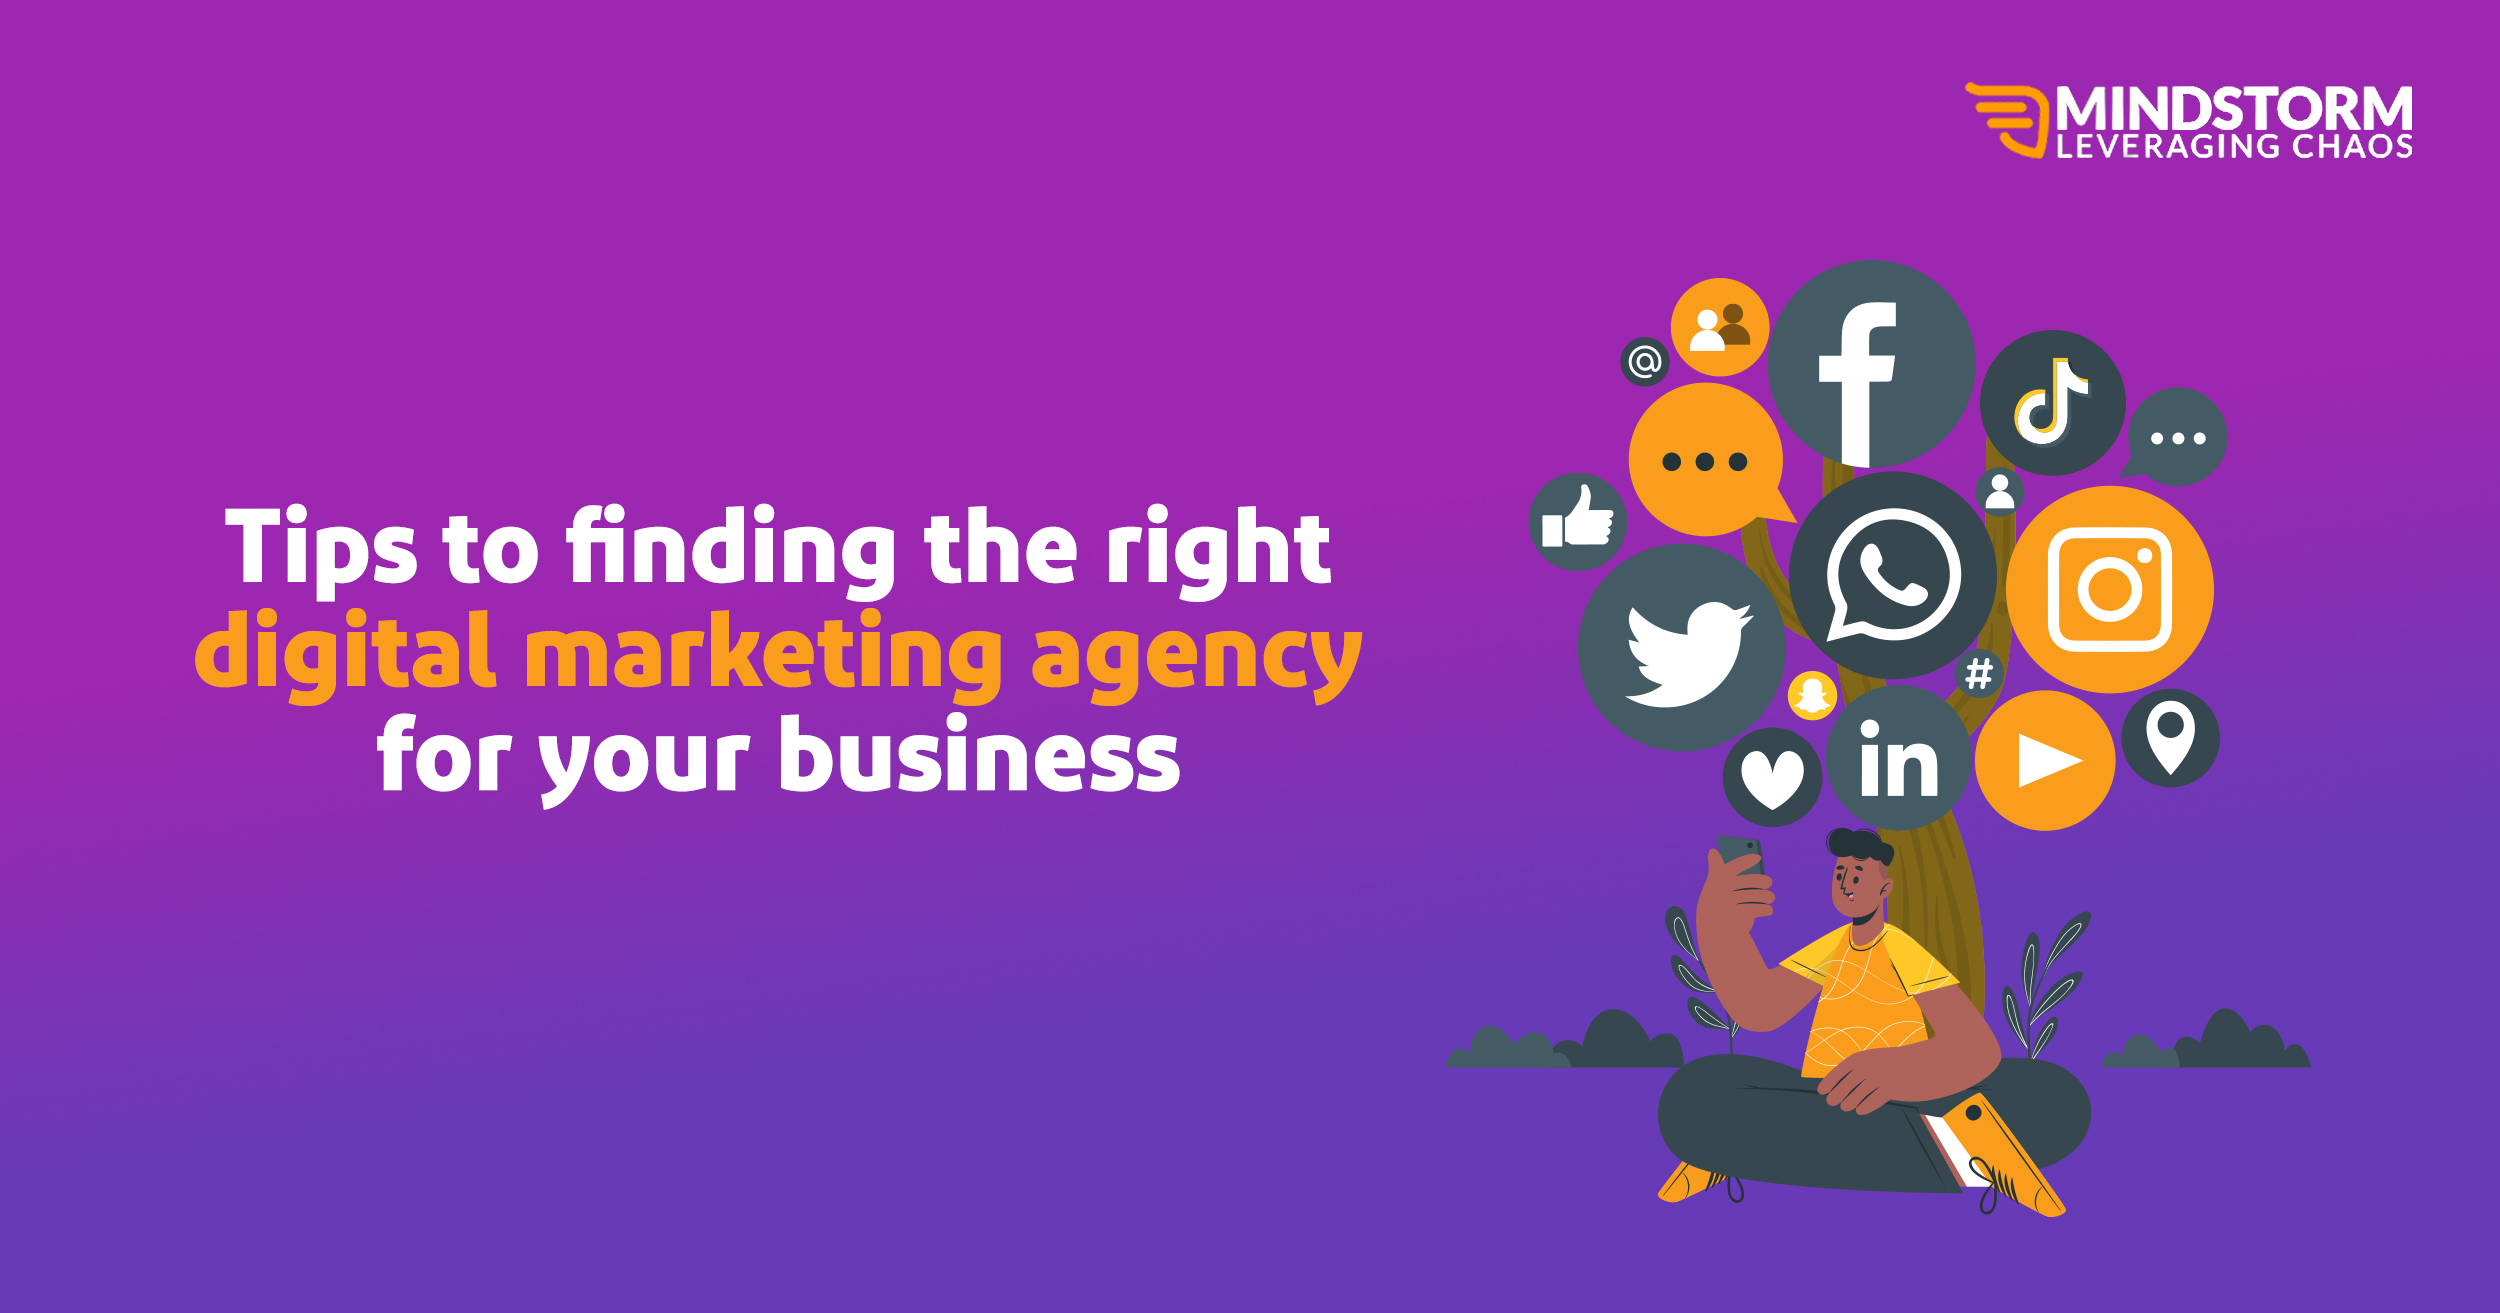 Tips to finding the right digital marketing agency for your business